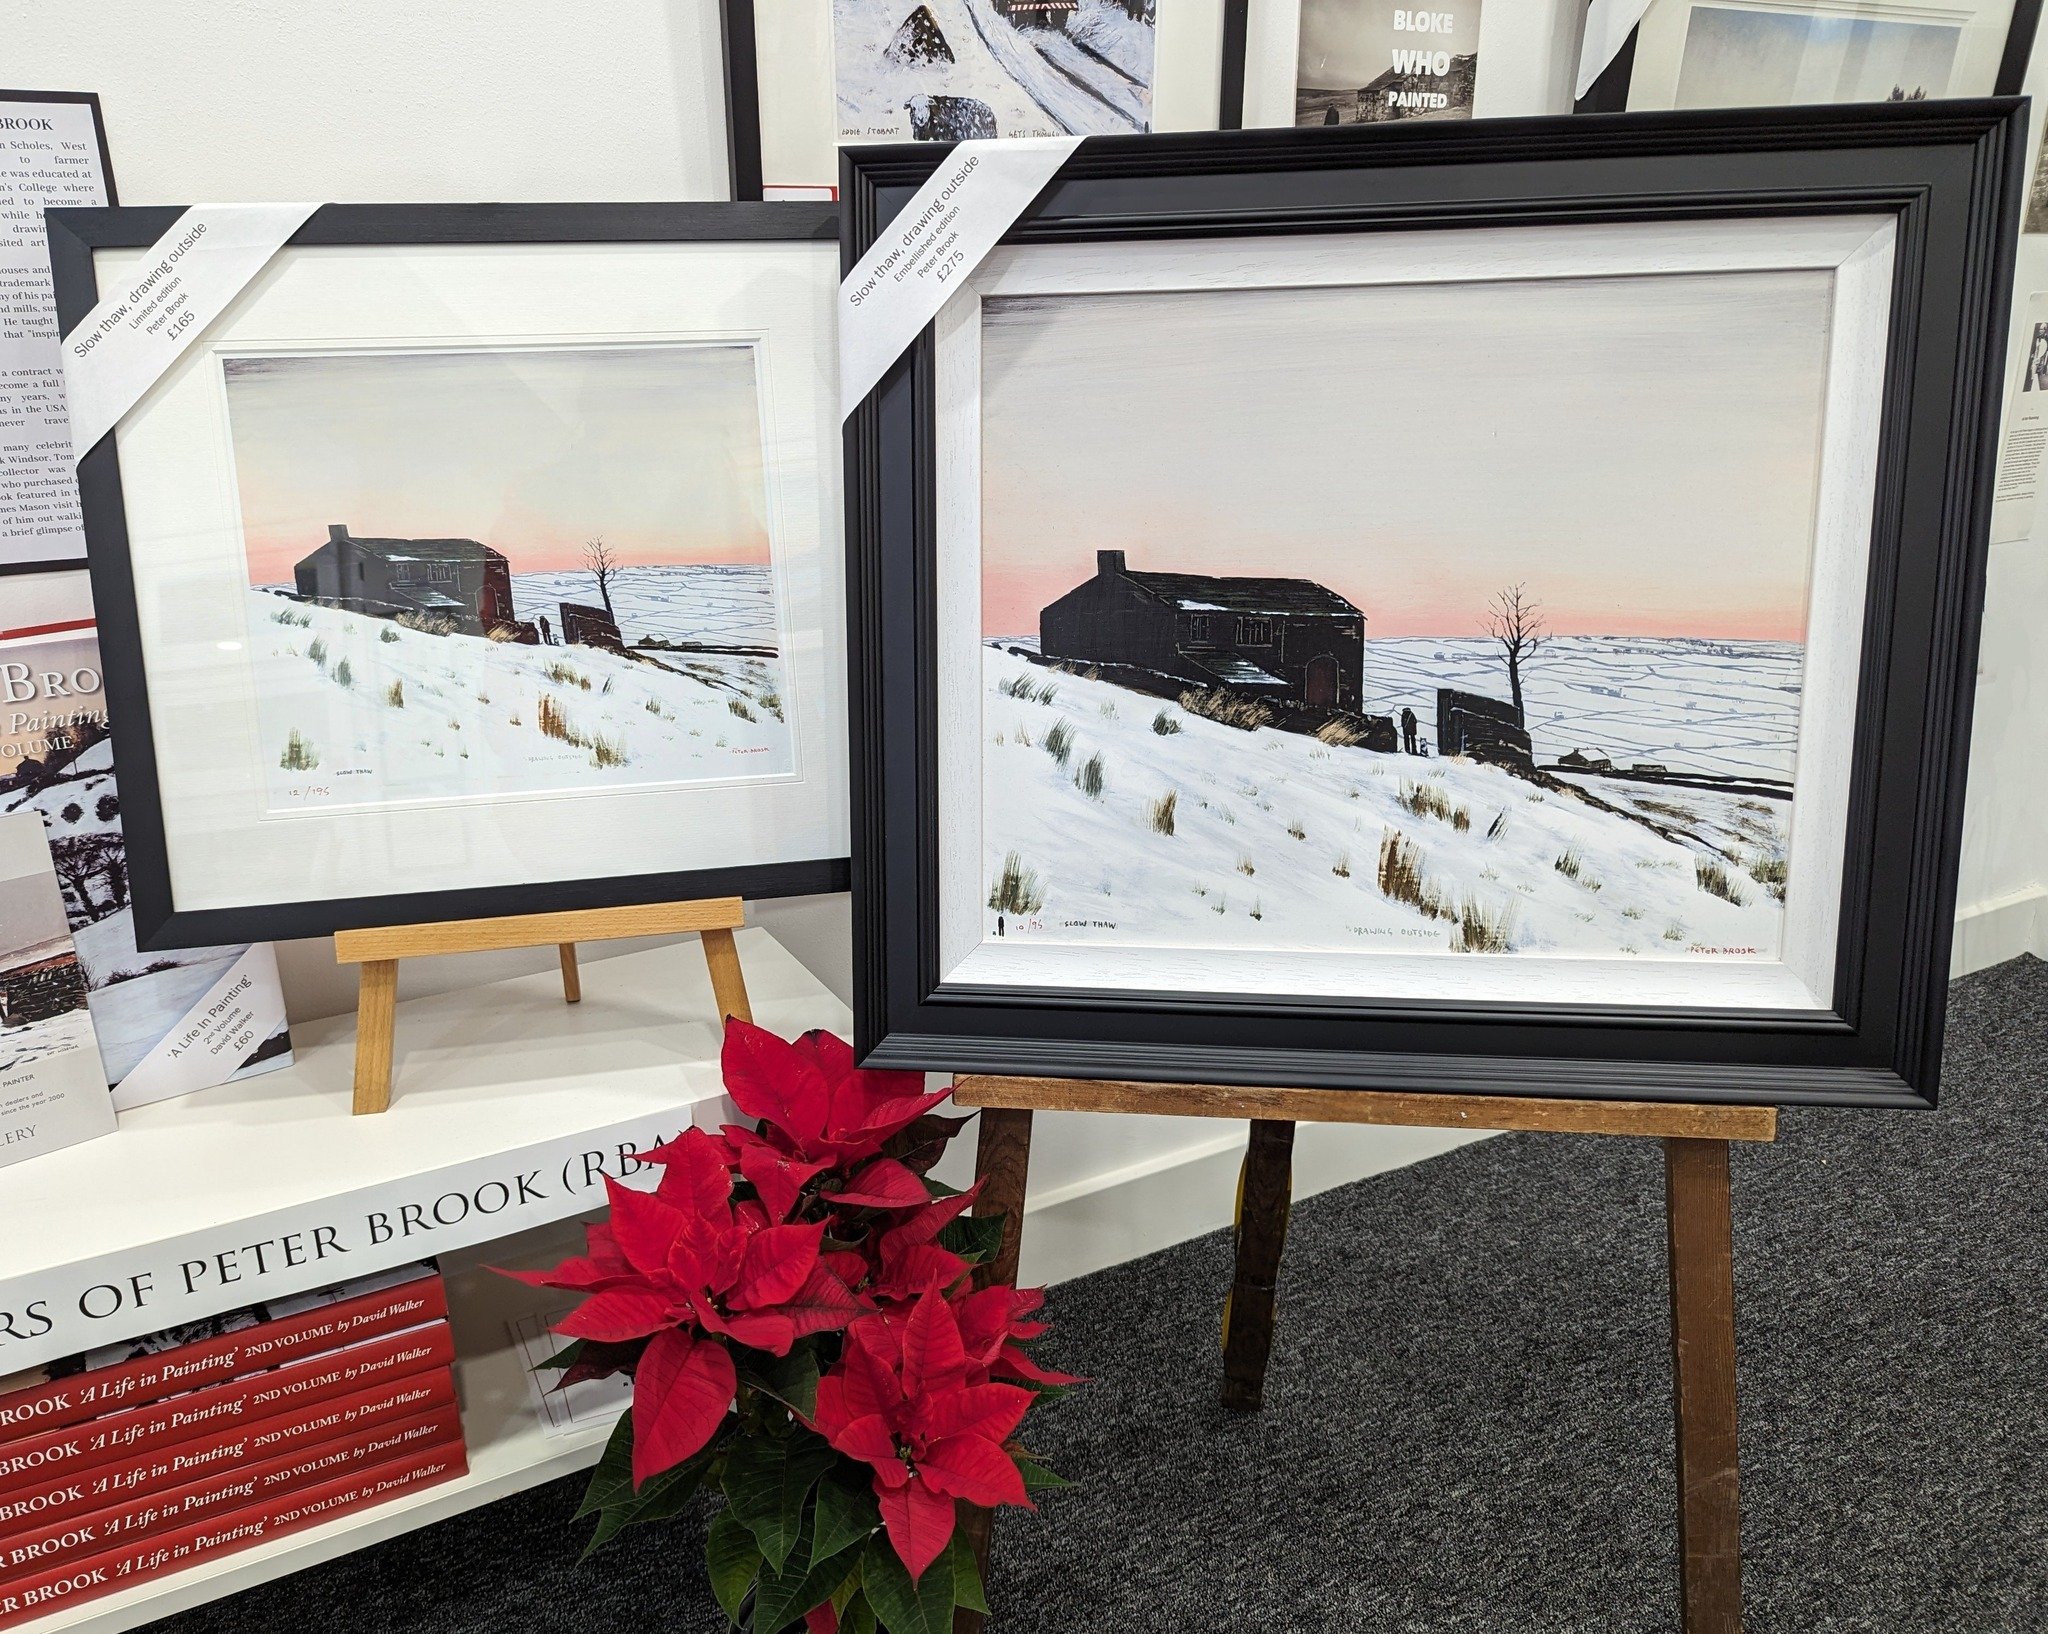 💕 'Slow Thaw, Drawing Outside' by Peter Brook

As you can see here, our Standard, Limited Edition on the left and our Embellished Limited Edition of this much loved Peter Brook print beside it on the right.

Embellished prints have hand-finished enh